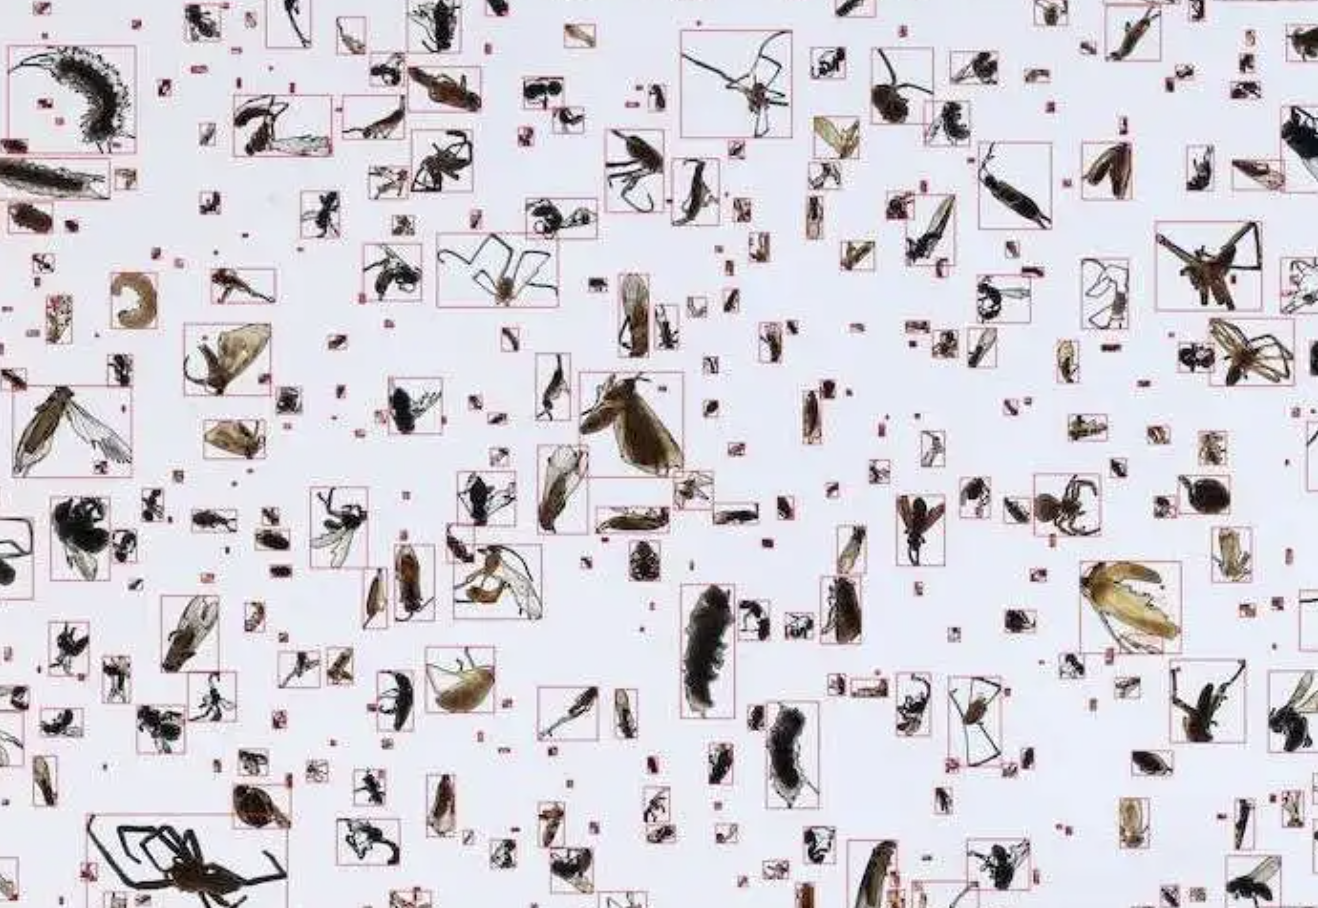 Insects on white background